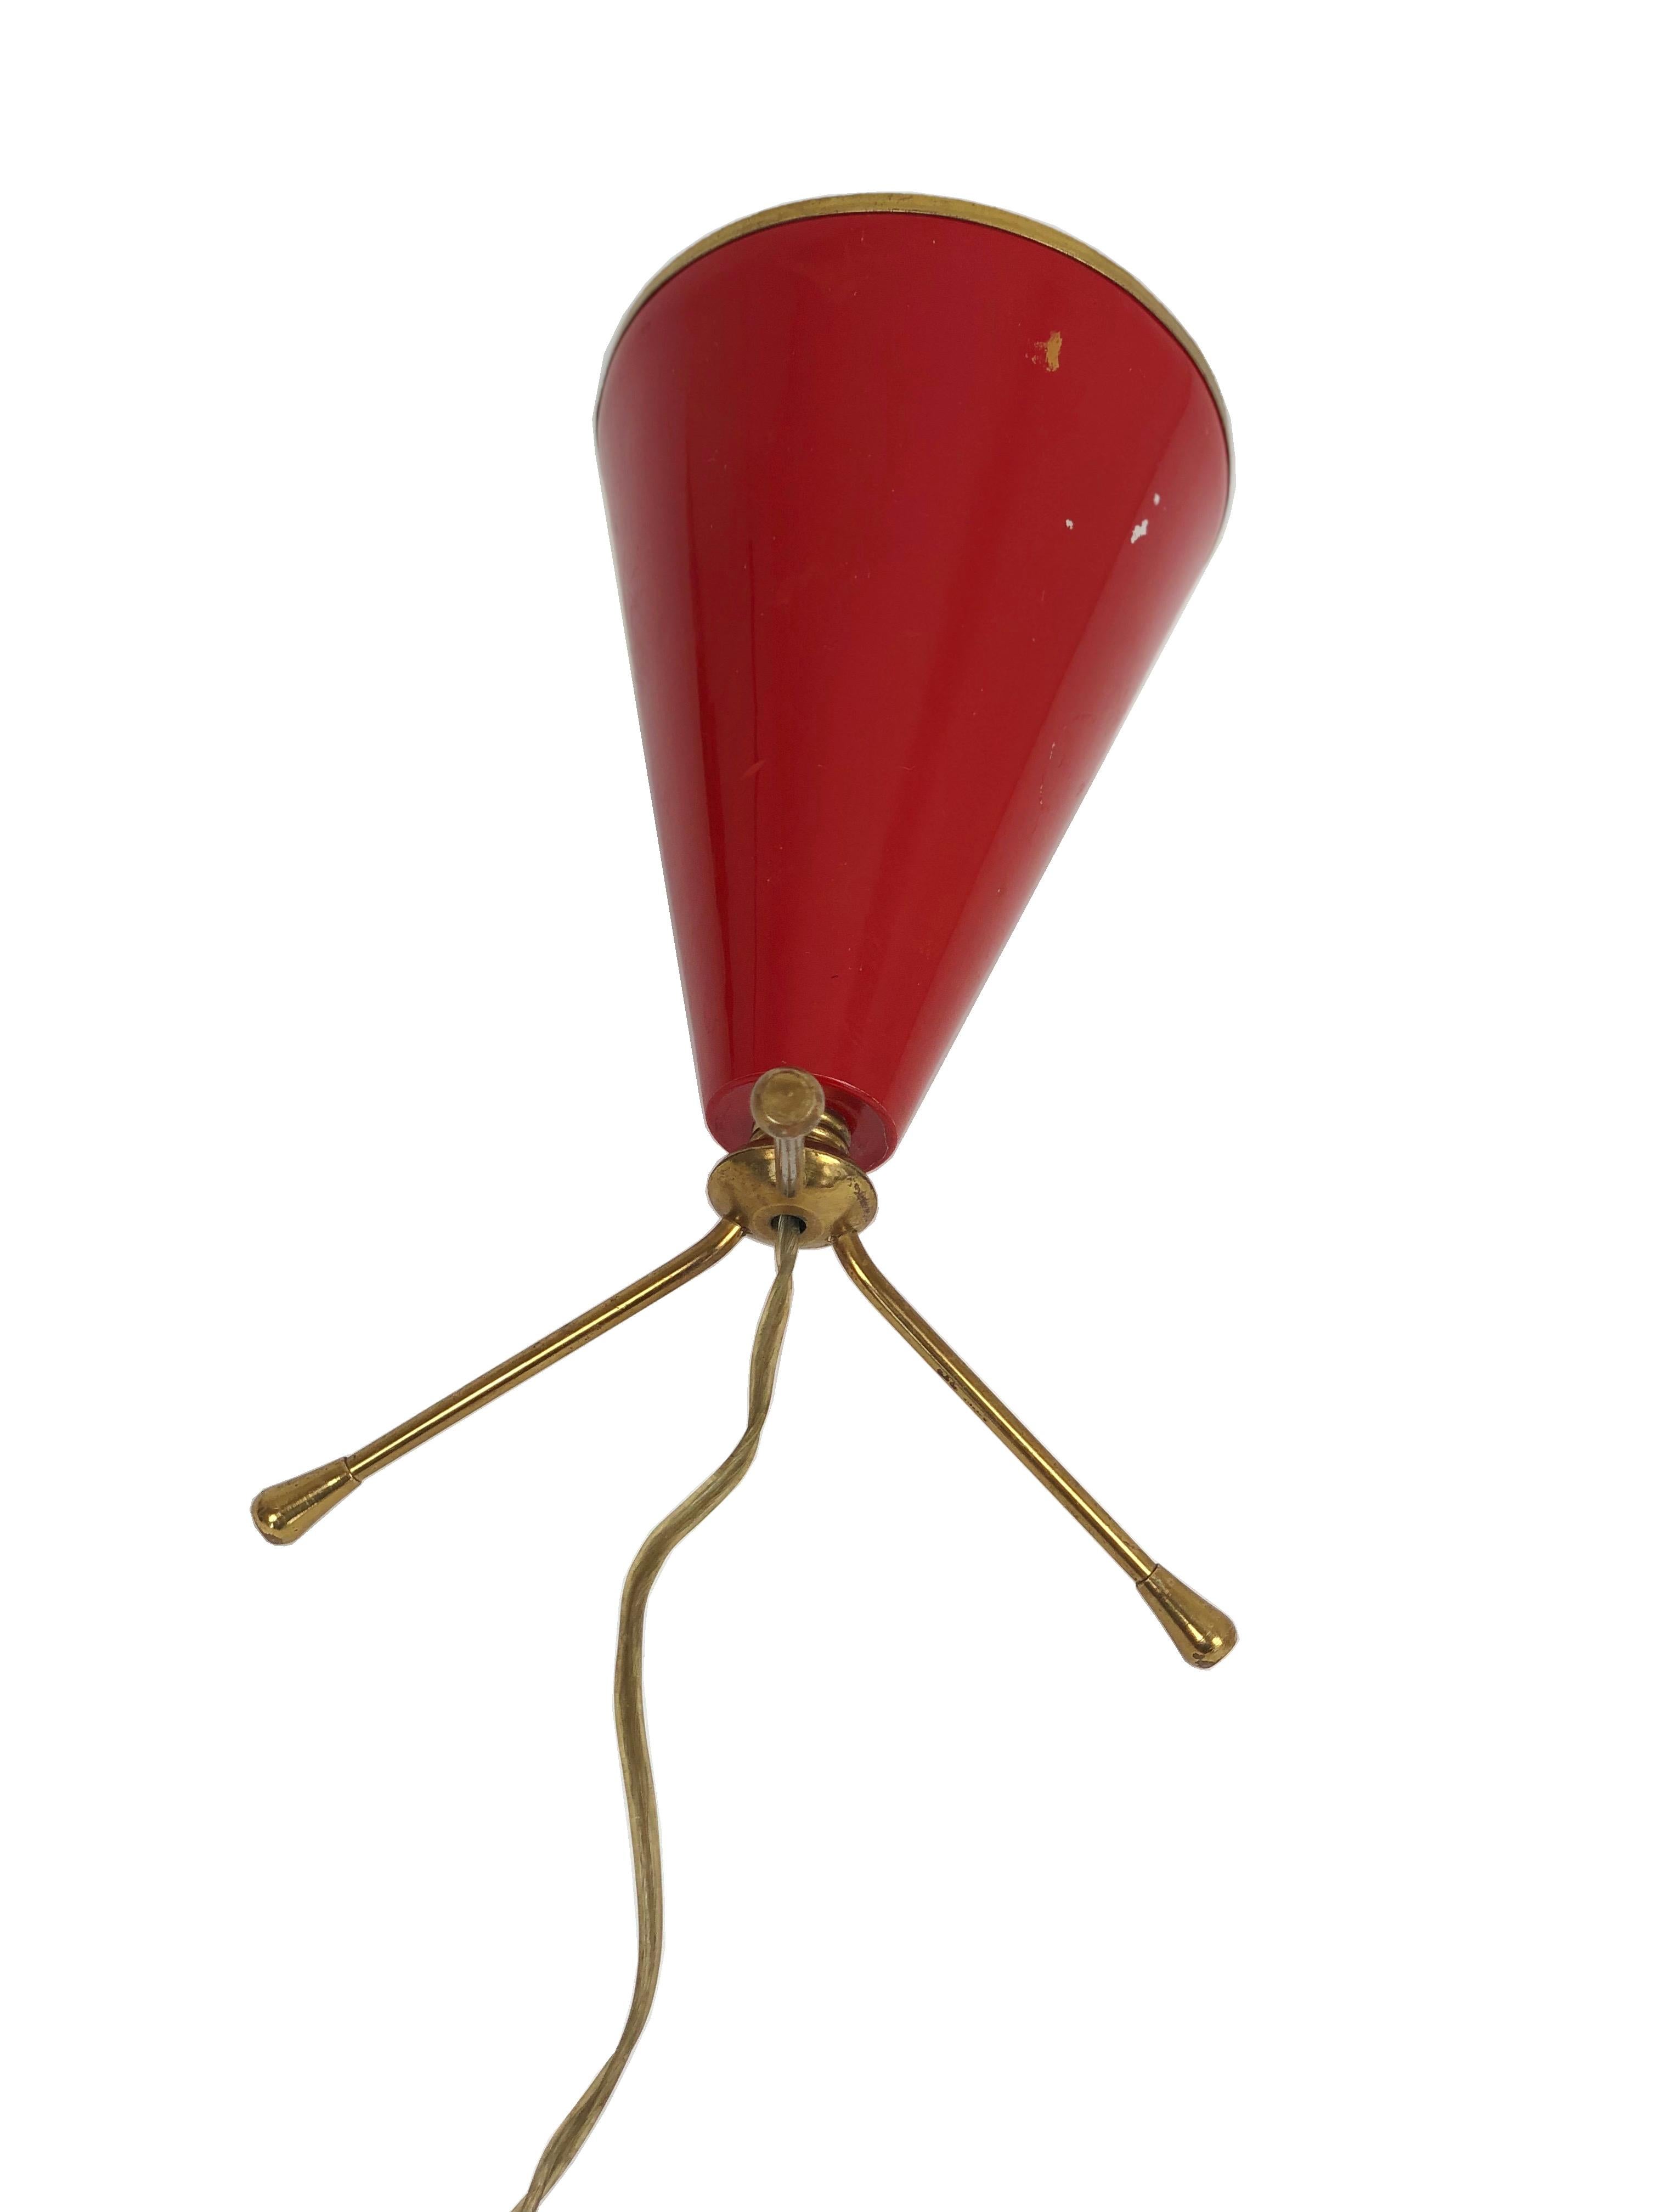 Petite Italian tripod cone shaped table lamp red lacquered metal. Borders and base in brass.
In the style of Stilnovo.